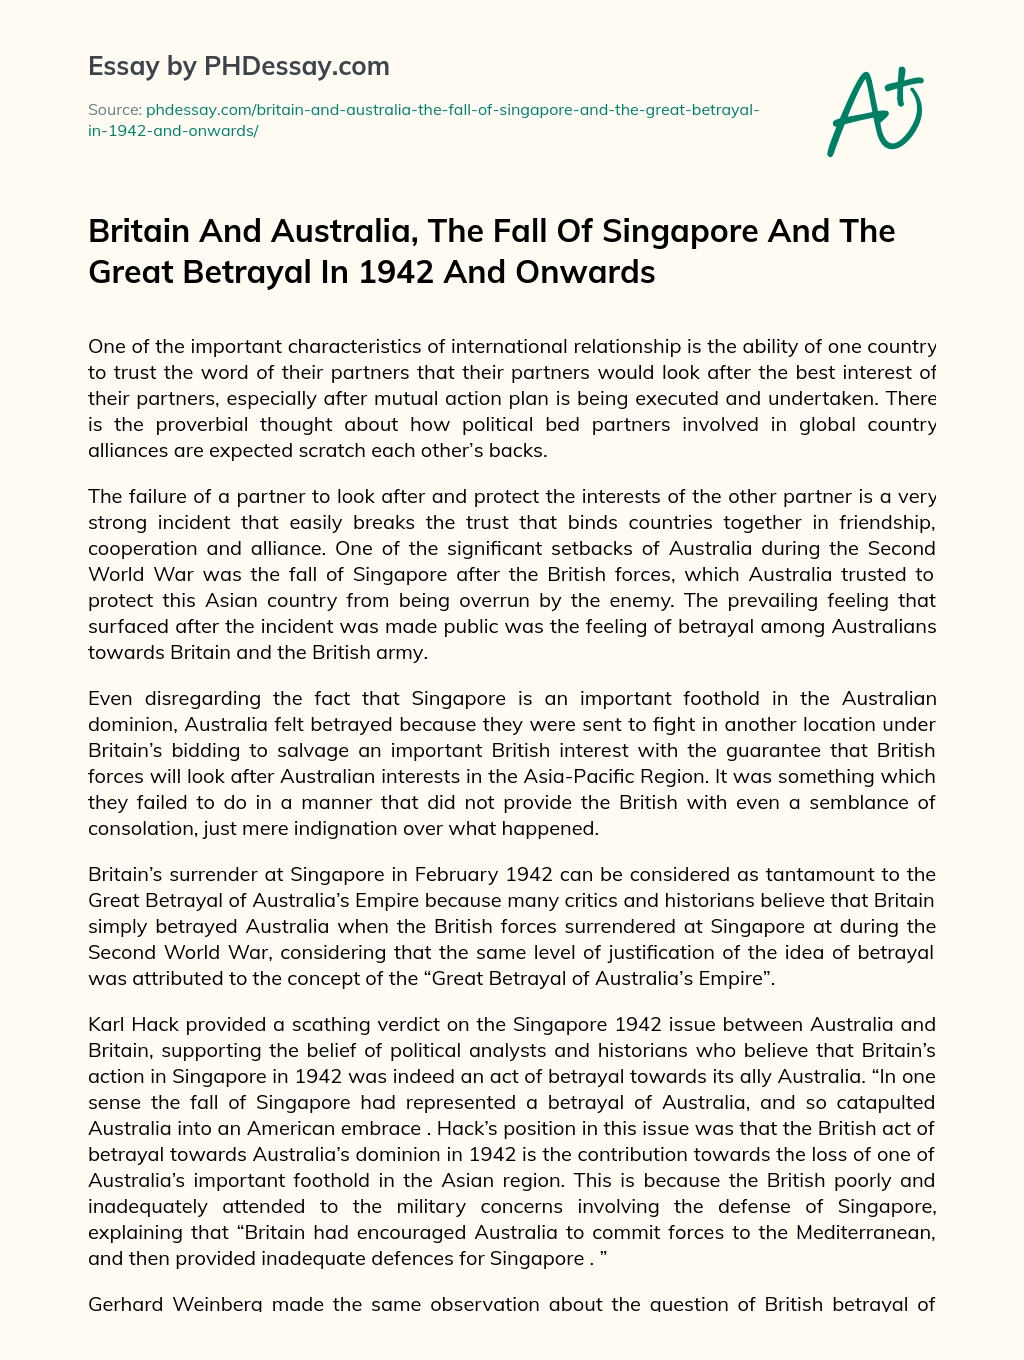 Britain And Australia, The Fall Of Singapore And The Great Betrayal In 1942 And Onwards essay